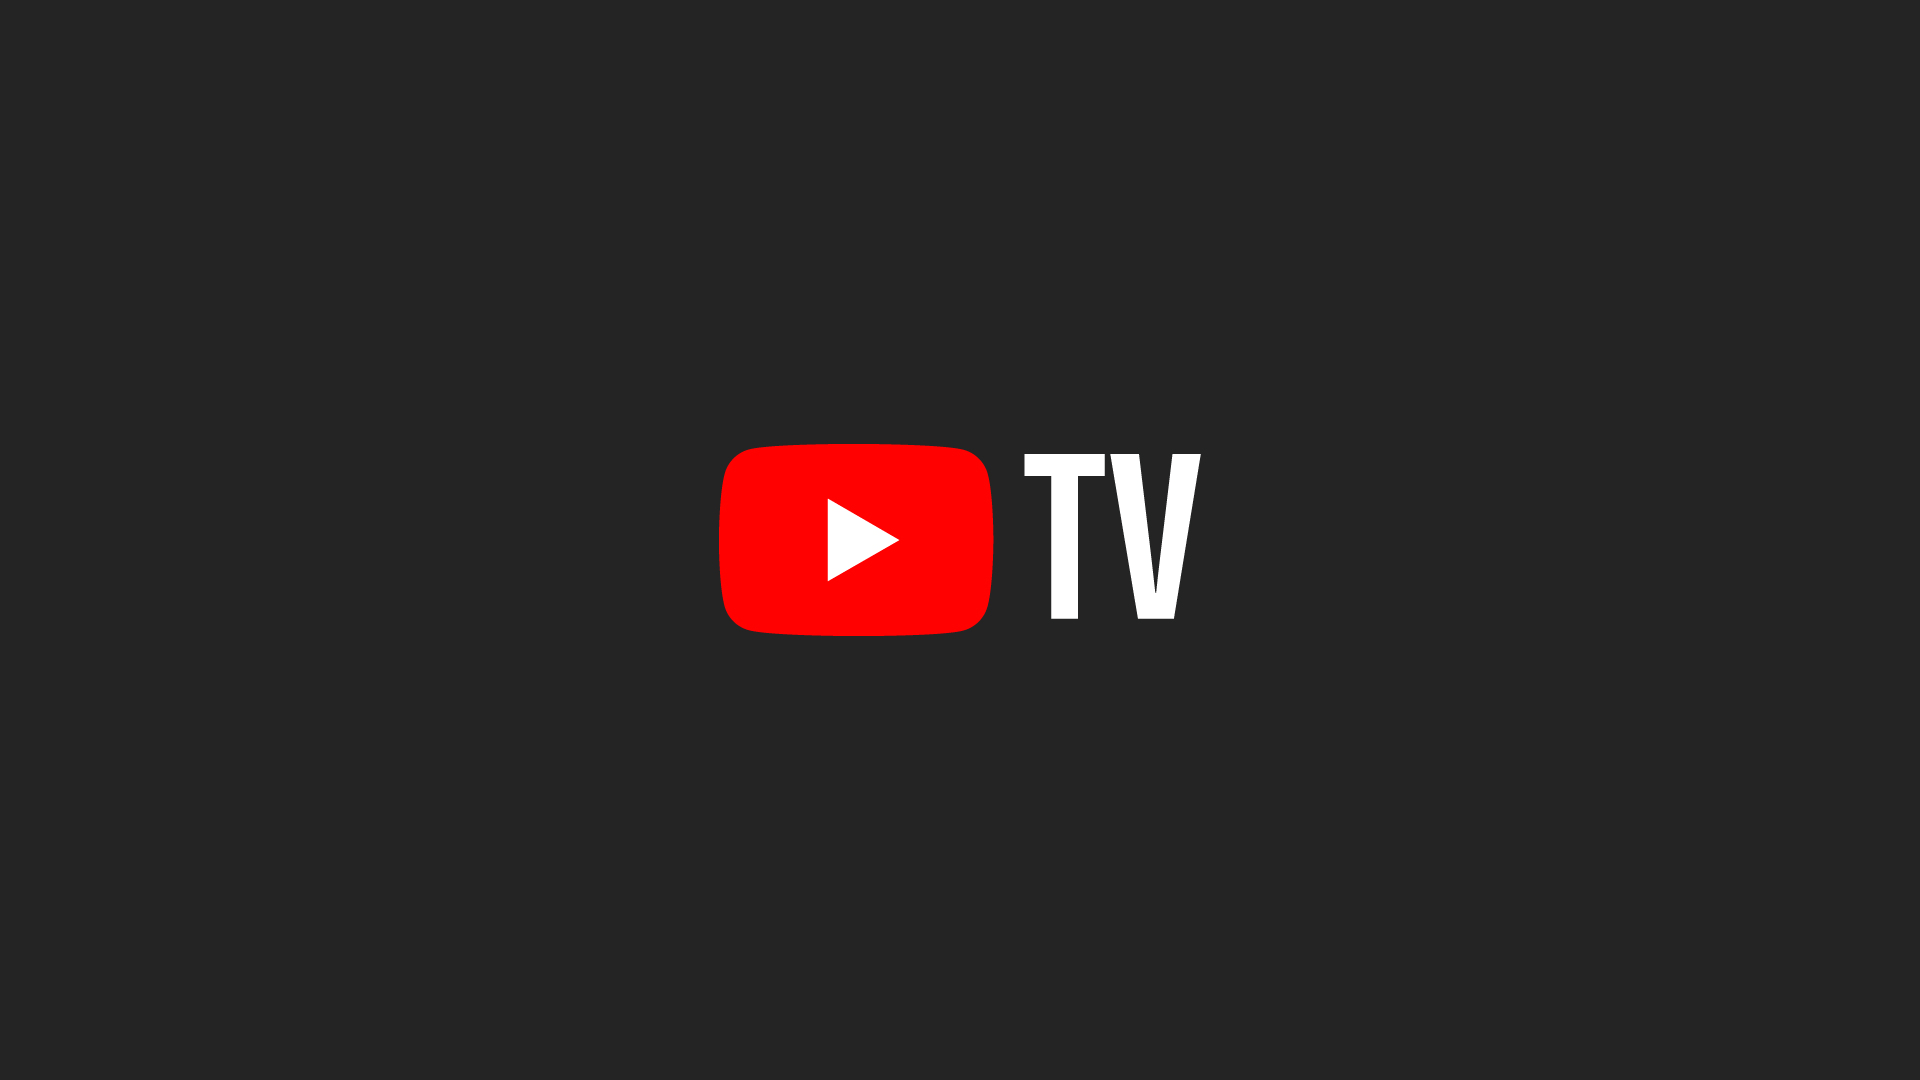 YouTube TV is Rolling Out a Fix to Its Apple TV App